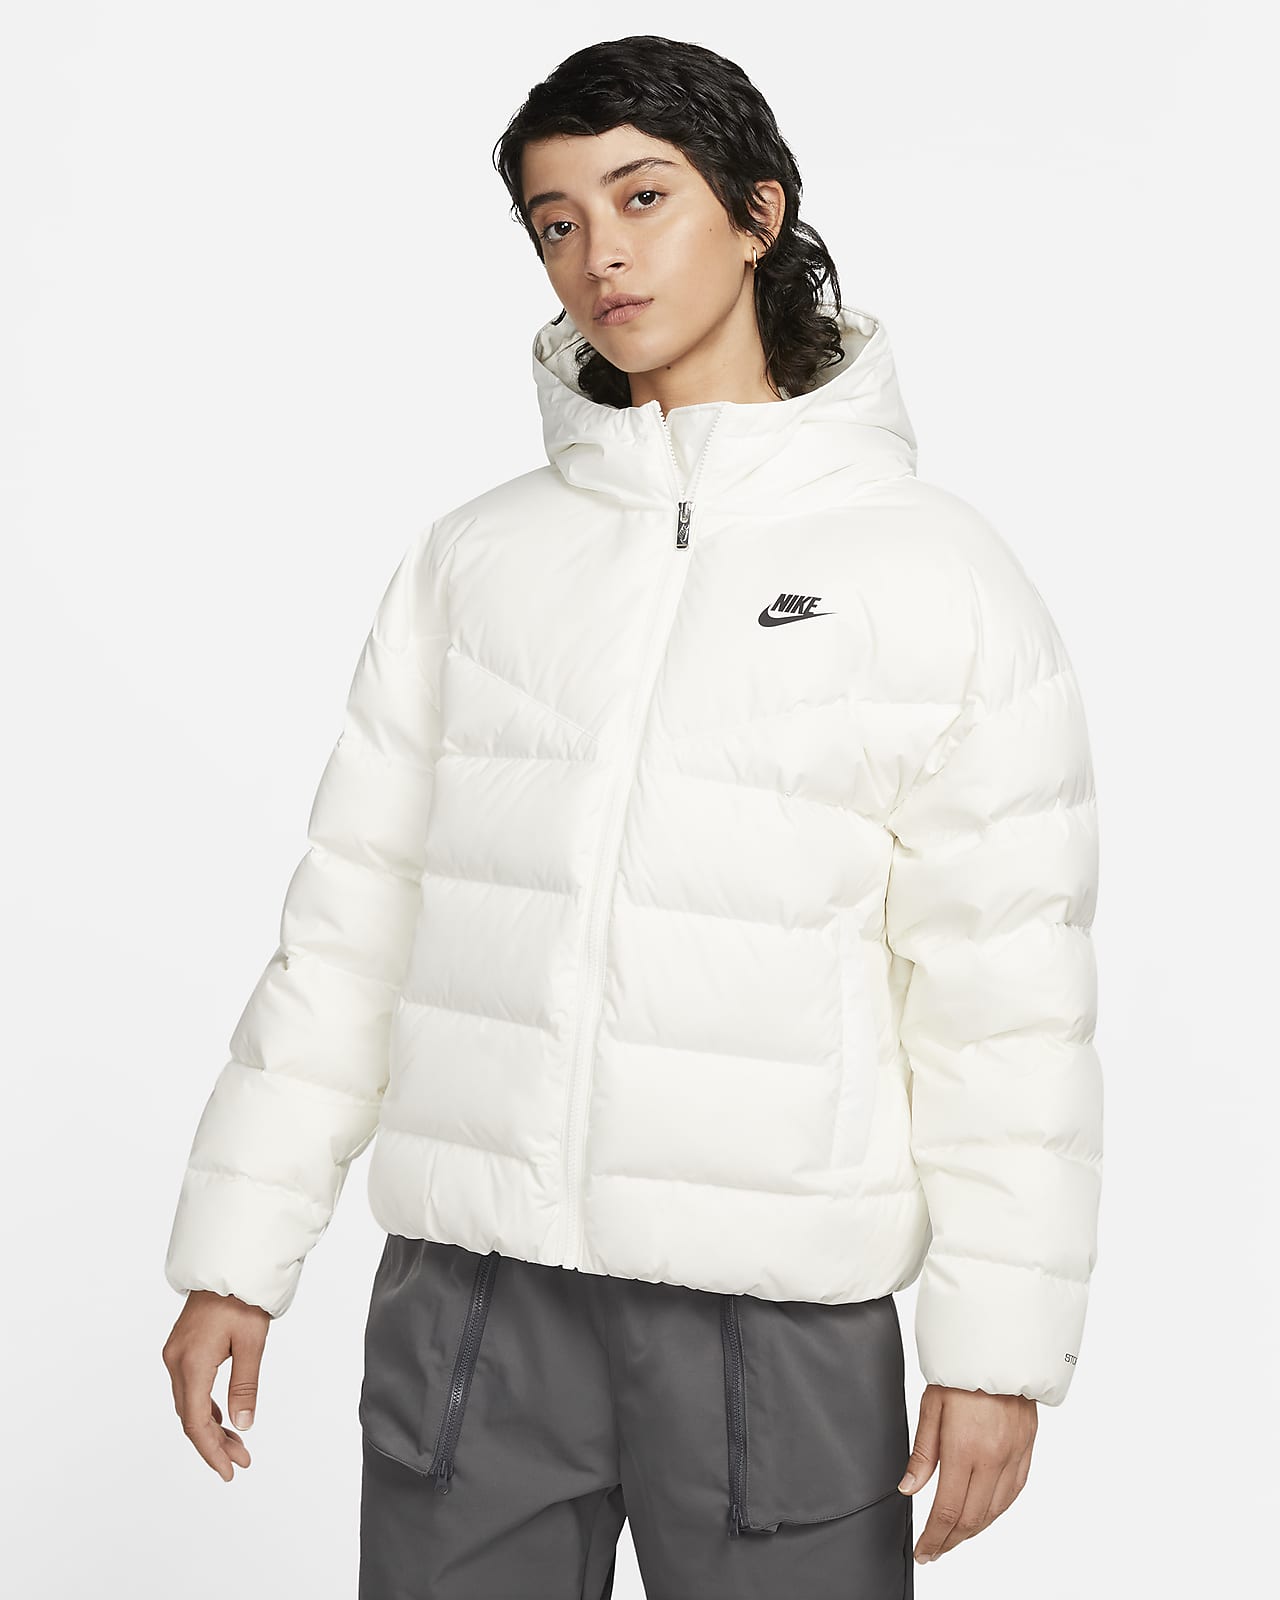 Cuyo Mezquita exceso Nike Sportswear Storm-FIT Windrunner Chaqueta con capucha y aislamiento -  Mujer. Nike ES